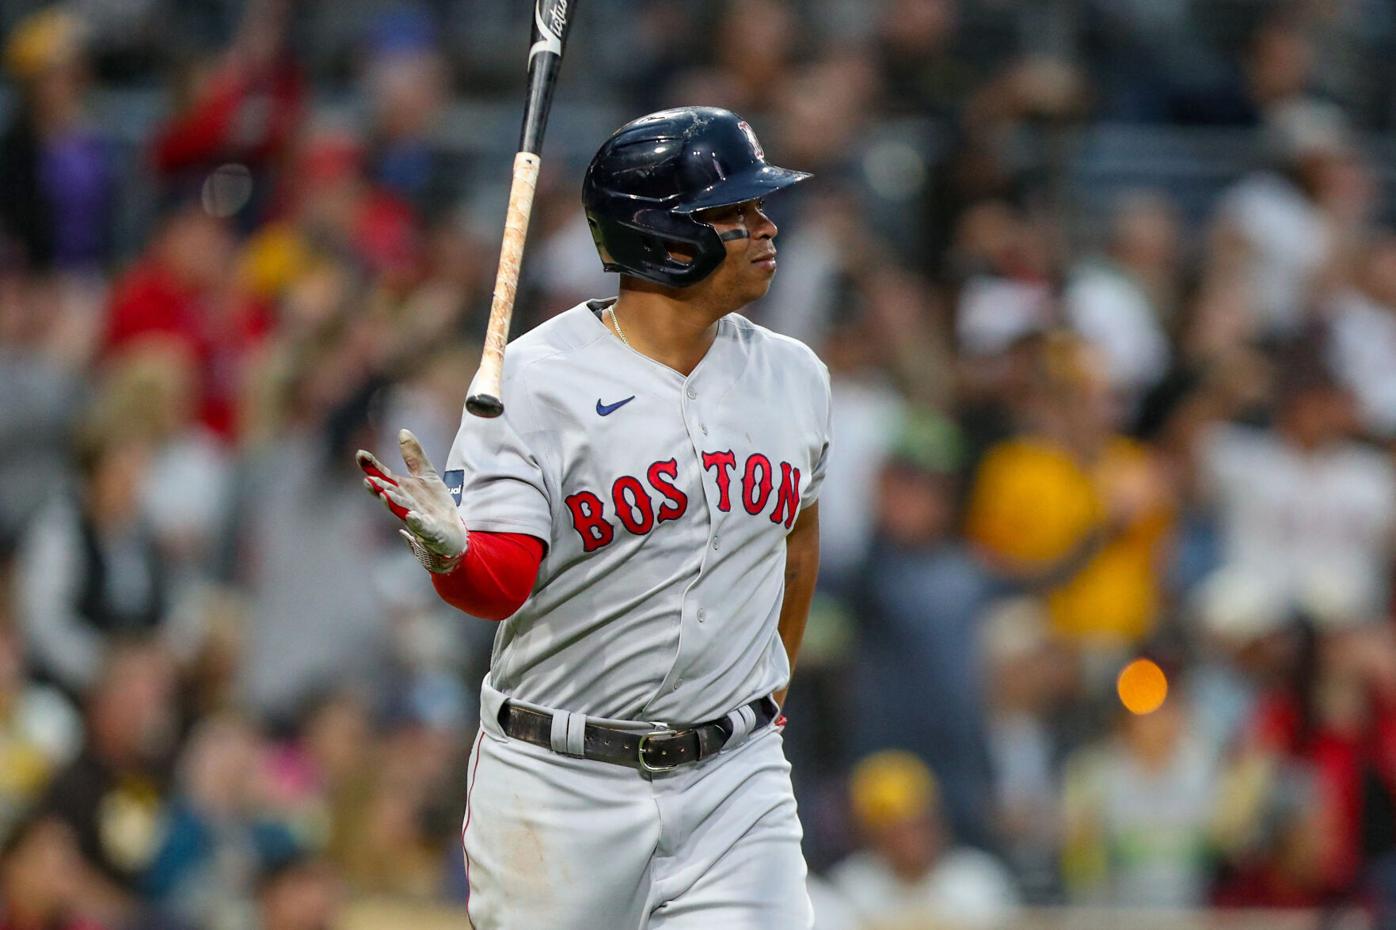 Devers homers twice and Paxton earns win